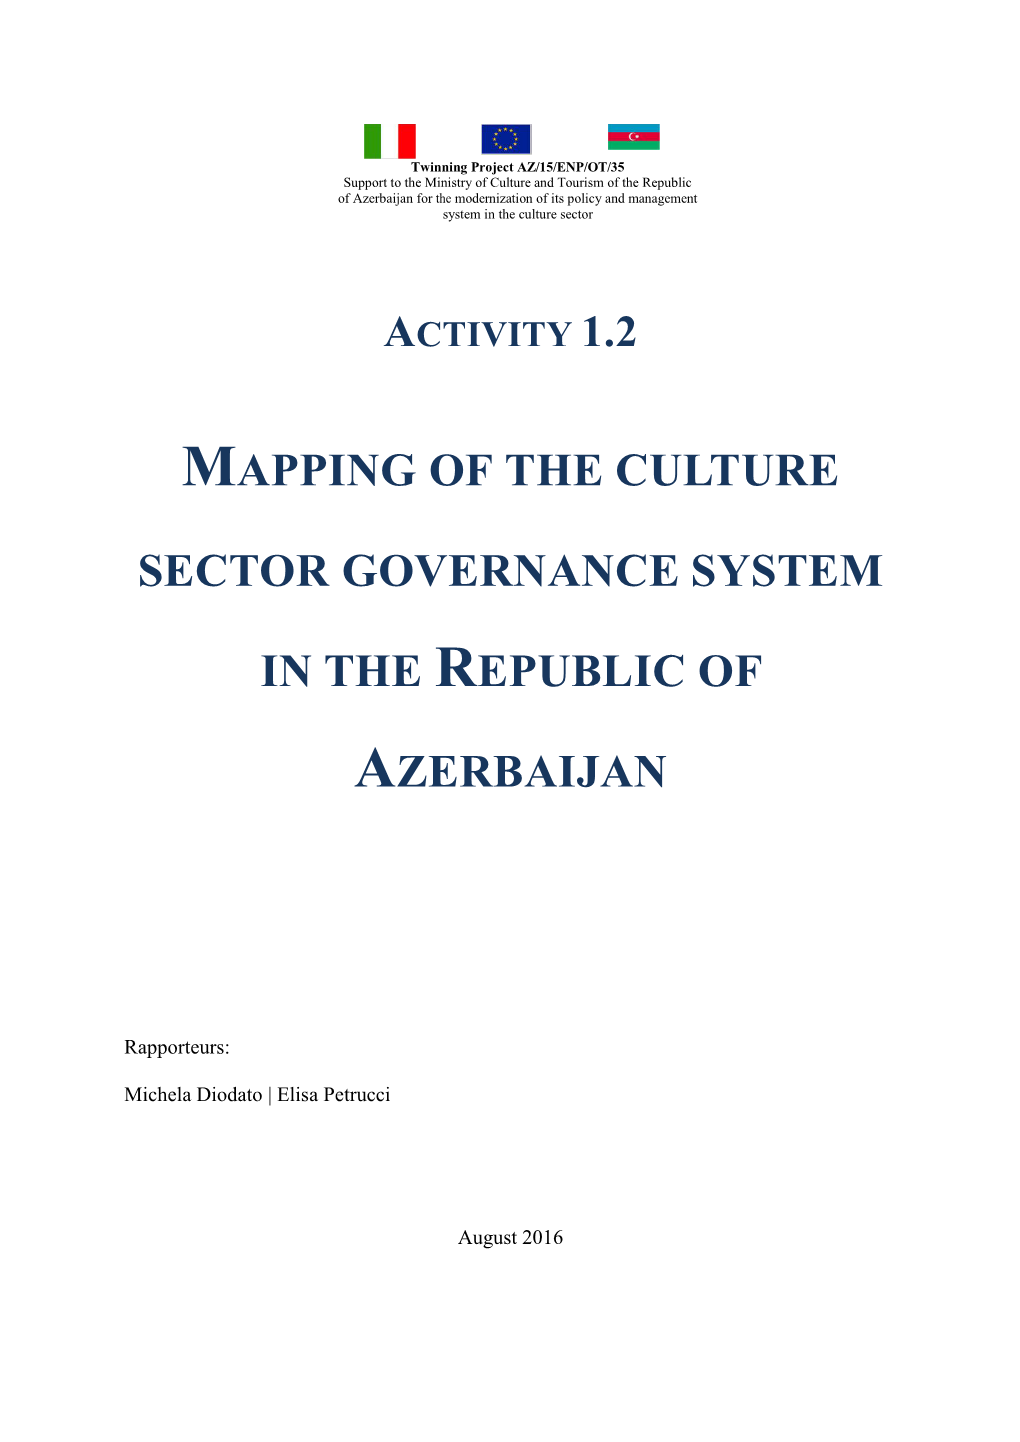 Mapping of the Culture Sector Governance System in the Republic